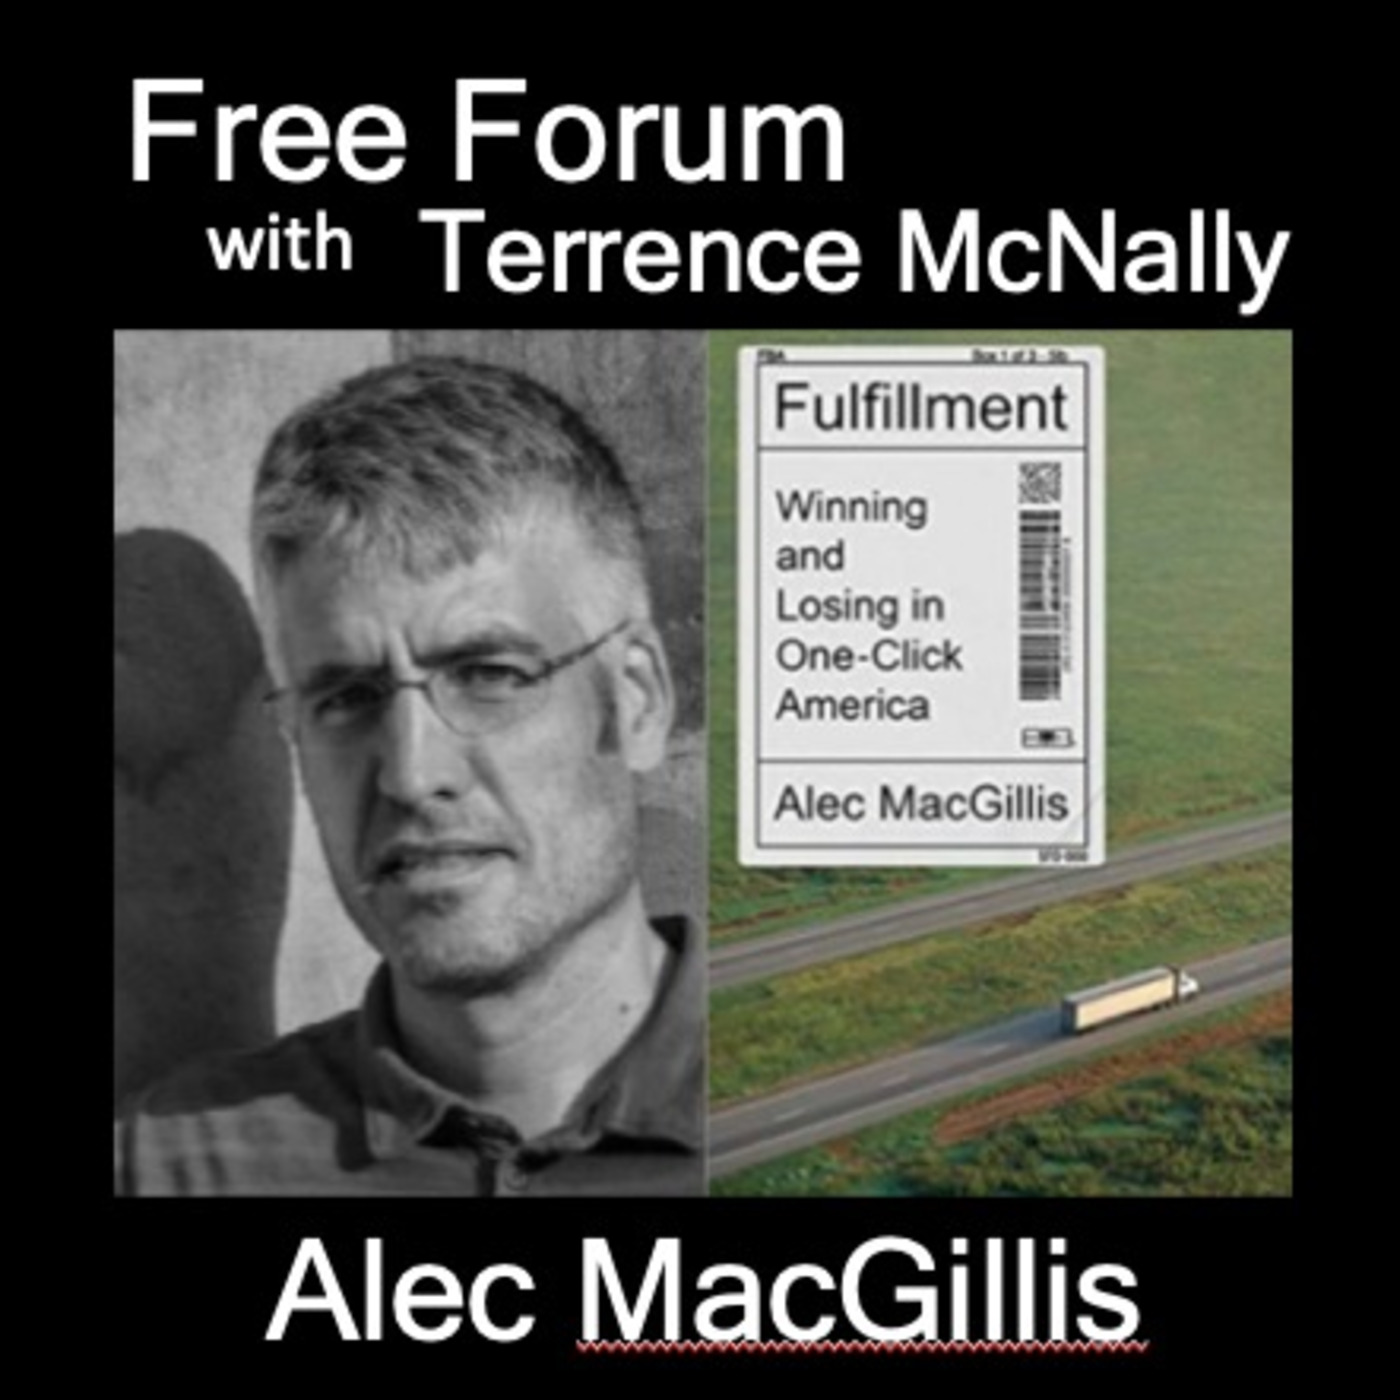 Episode 514: ALEC MacGILLIS - How is Amazon changing us? FULFILLMENT: Winning and Losing in One-Click America